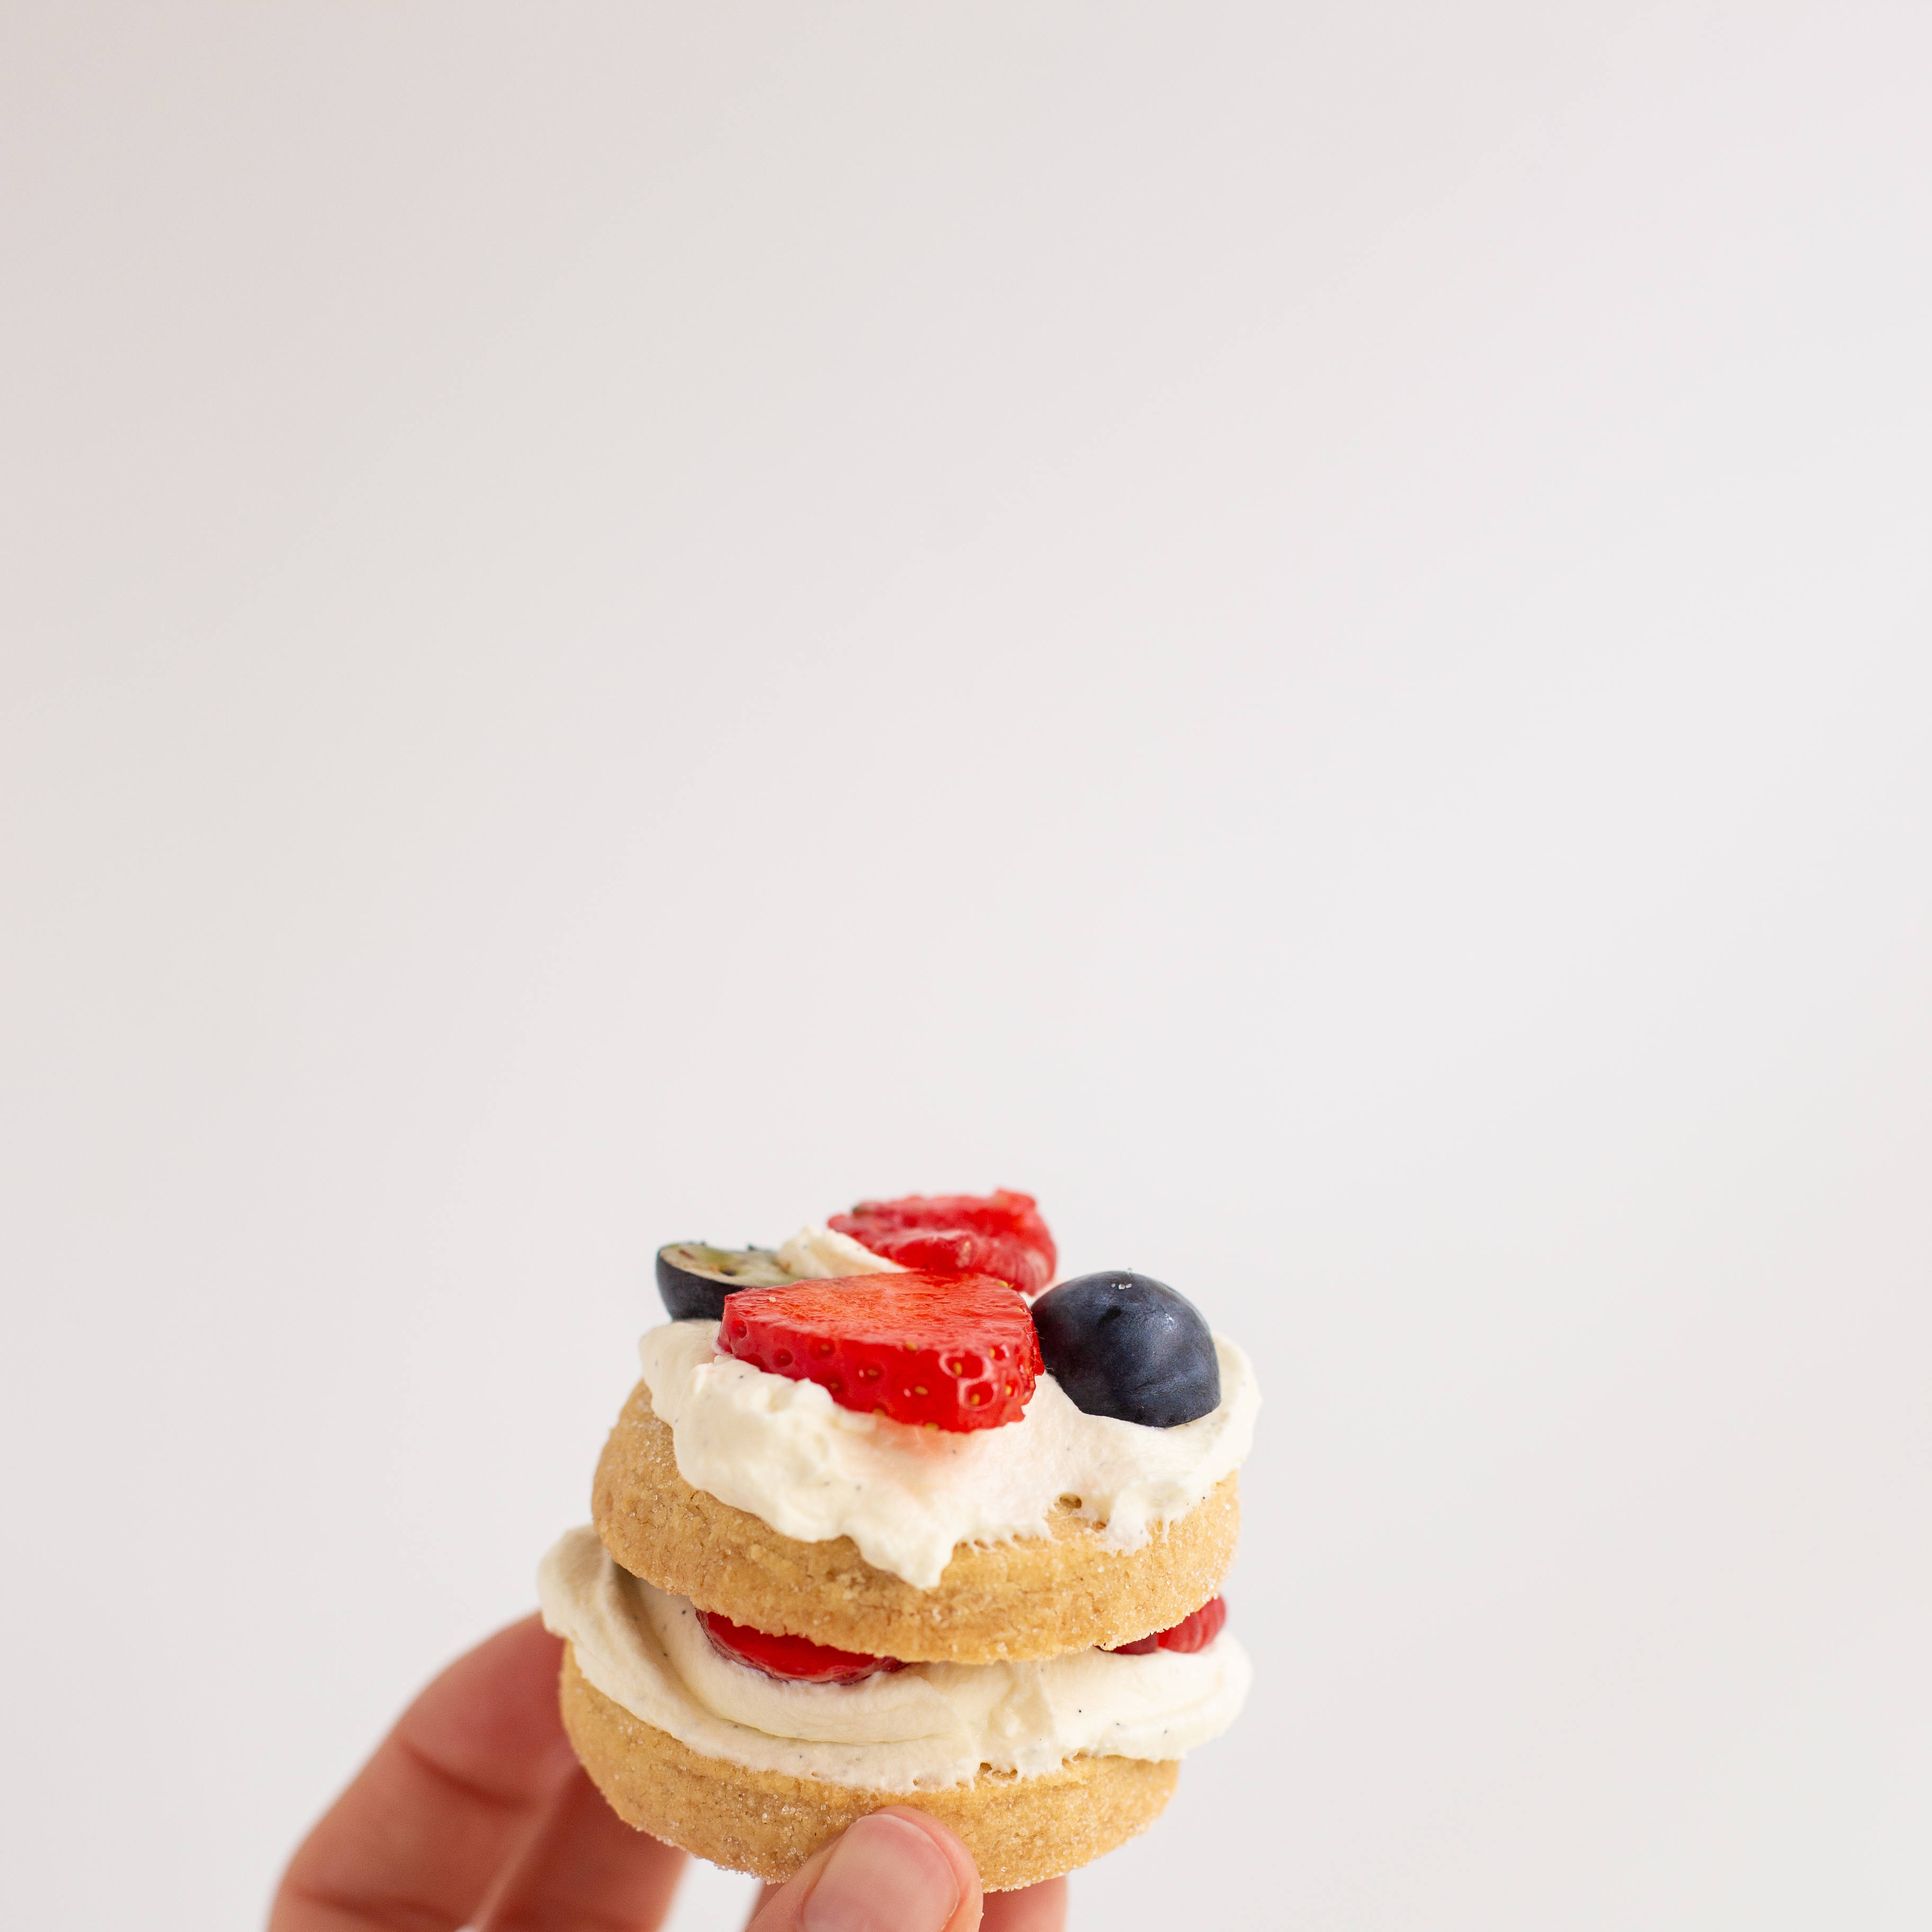 Get creative and stack up the layered shortbread rounds on top of each other!